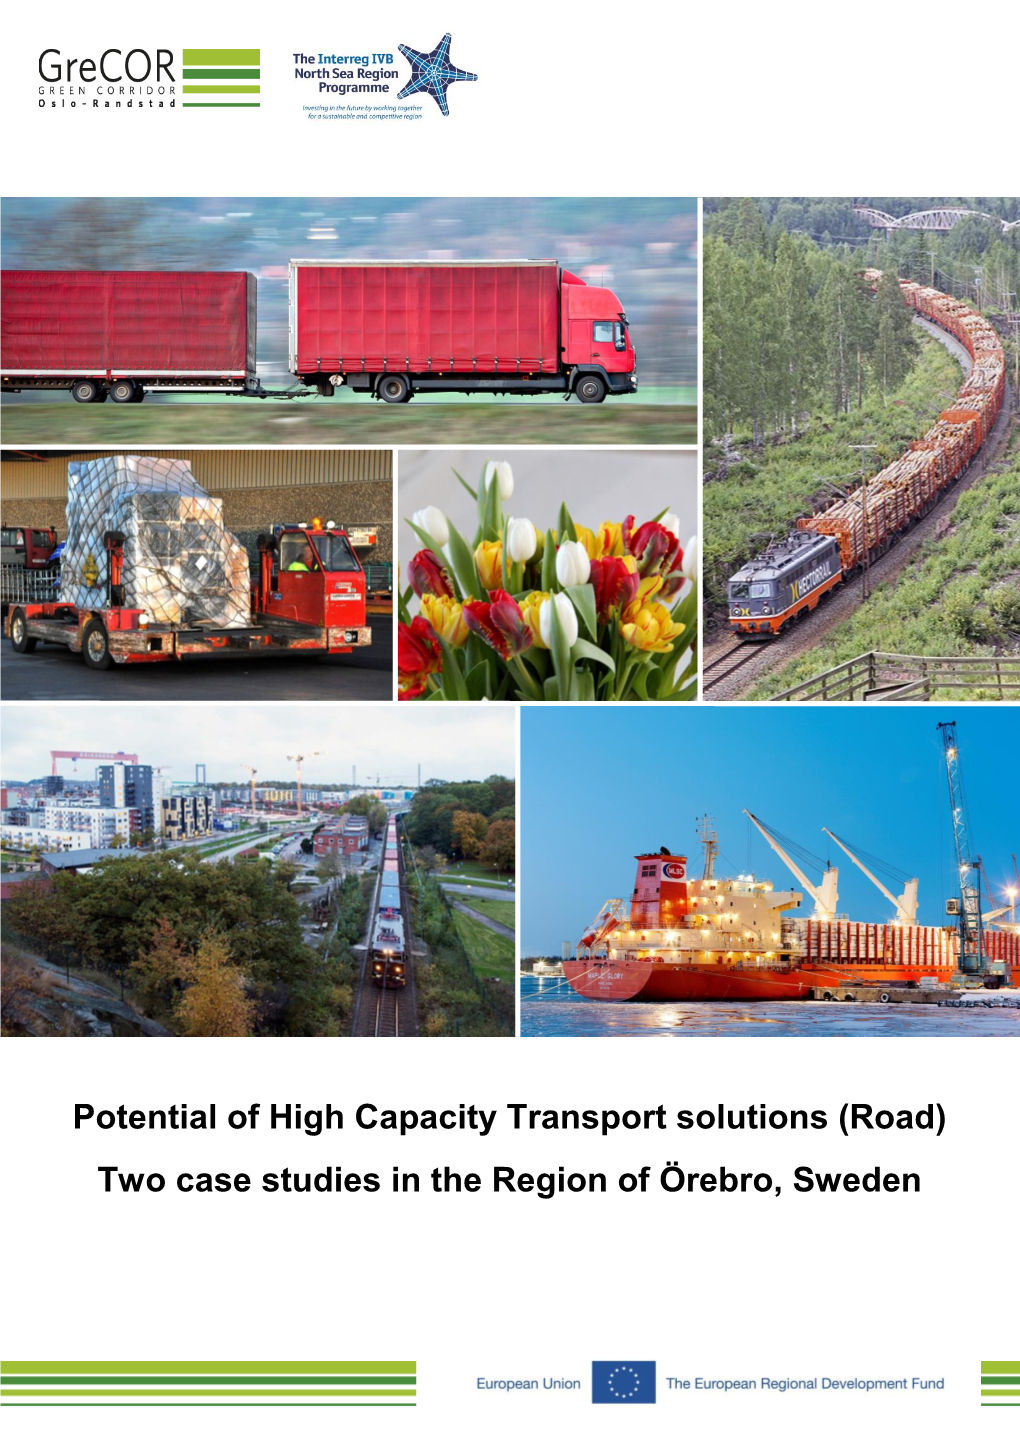 Potential of High Capacity Transport Solutions (Road) Two Case Studies